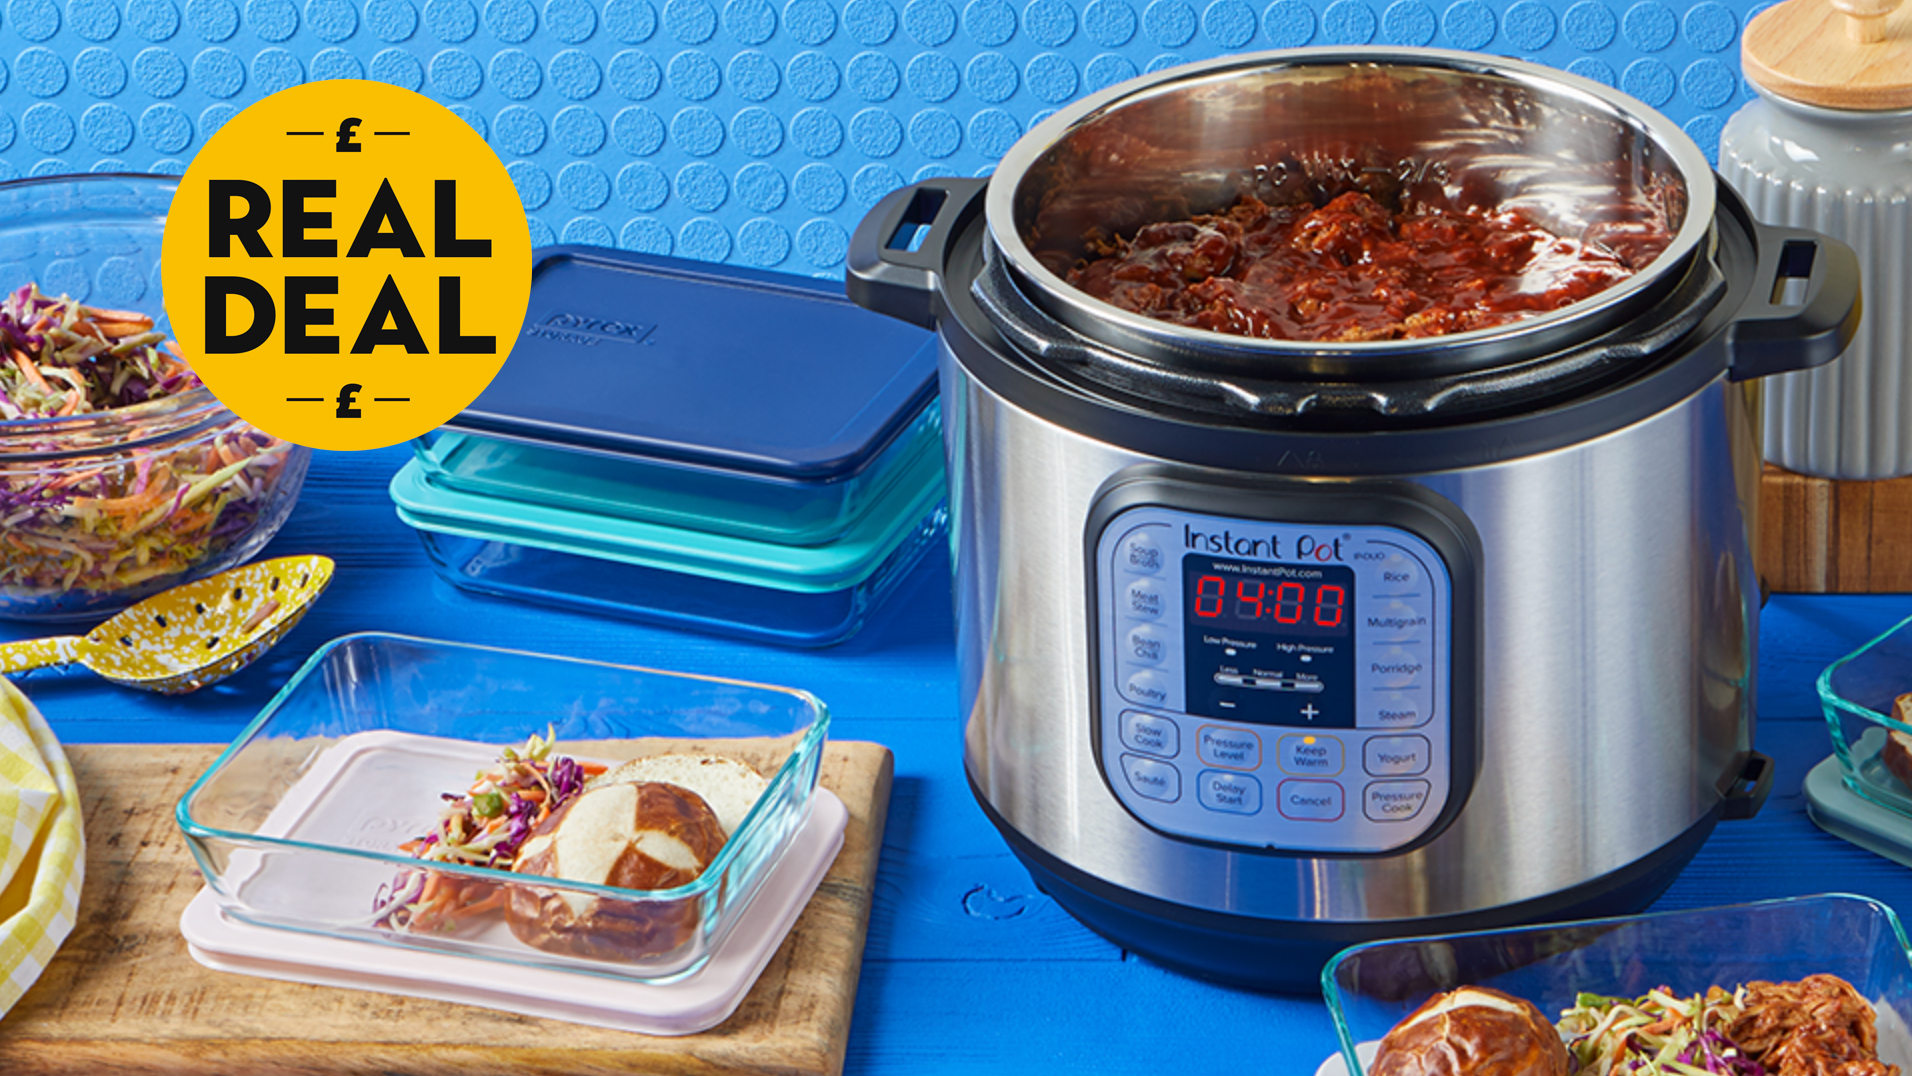 Don't Miss This Instant Pot Air Fryer Cyber Monday Deal Today